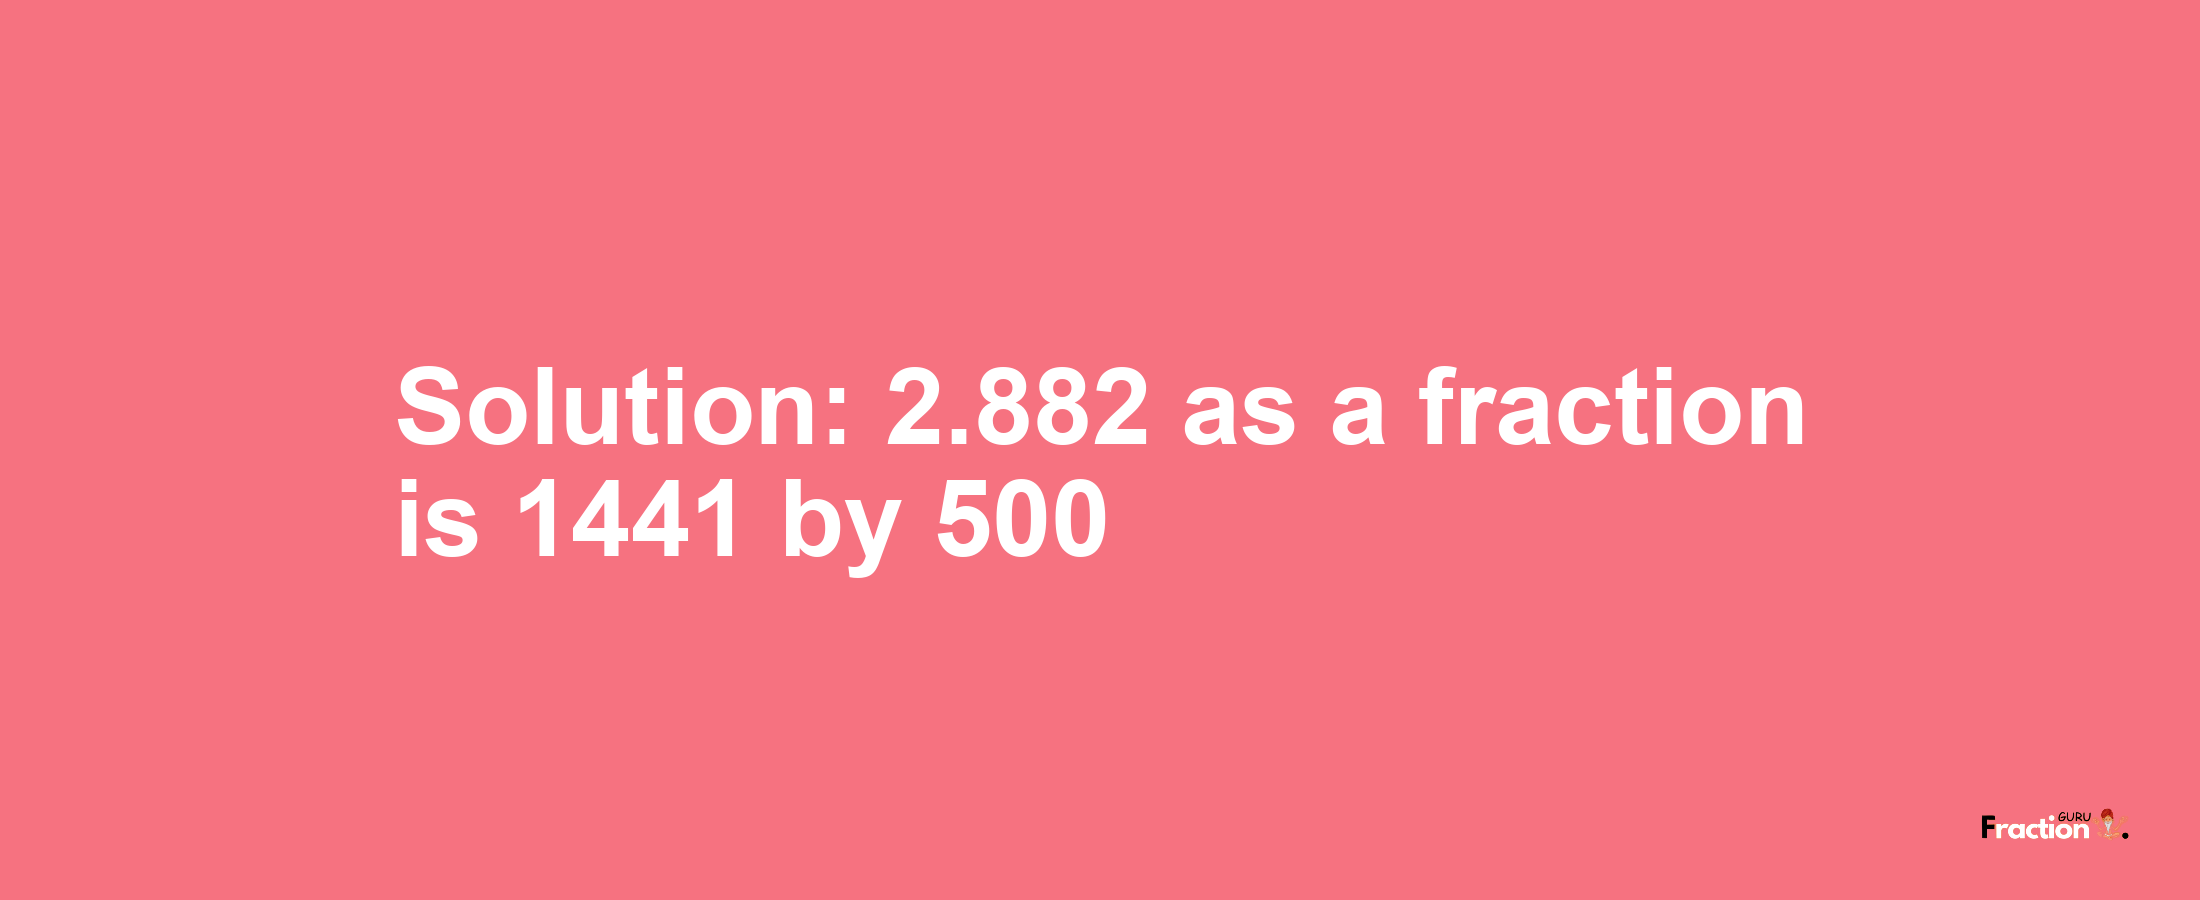 Solution:2.882 as a fraction is 1441/500